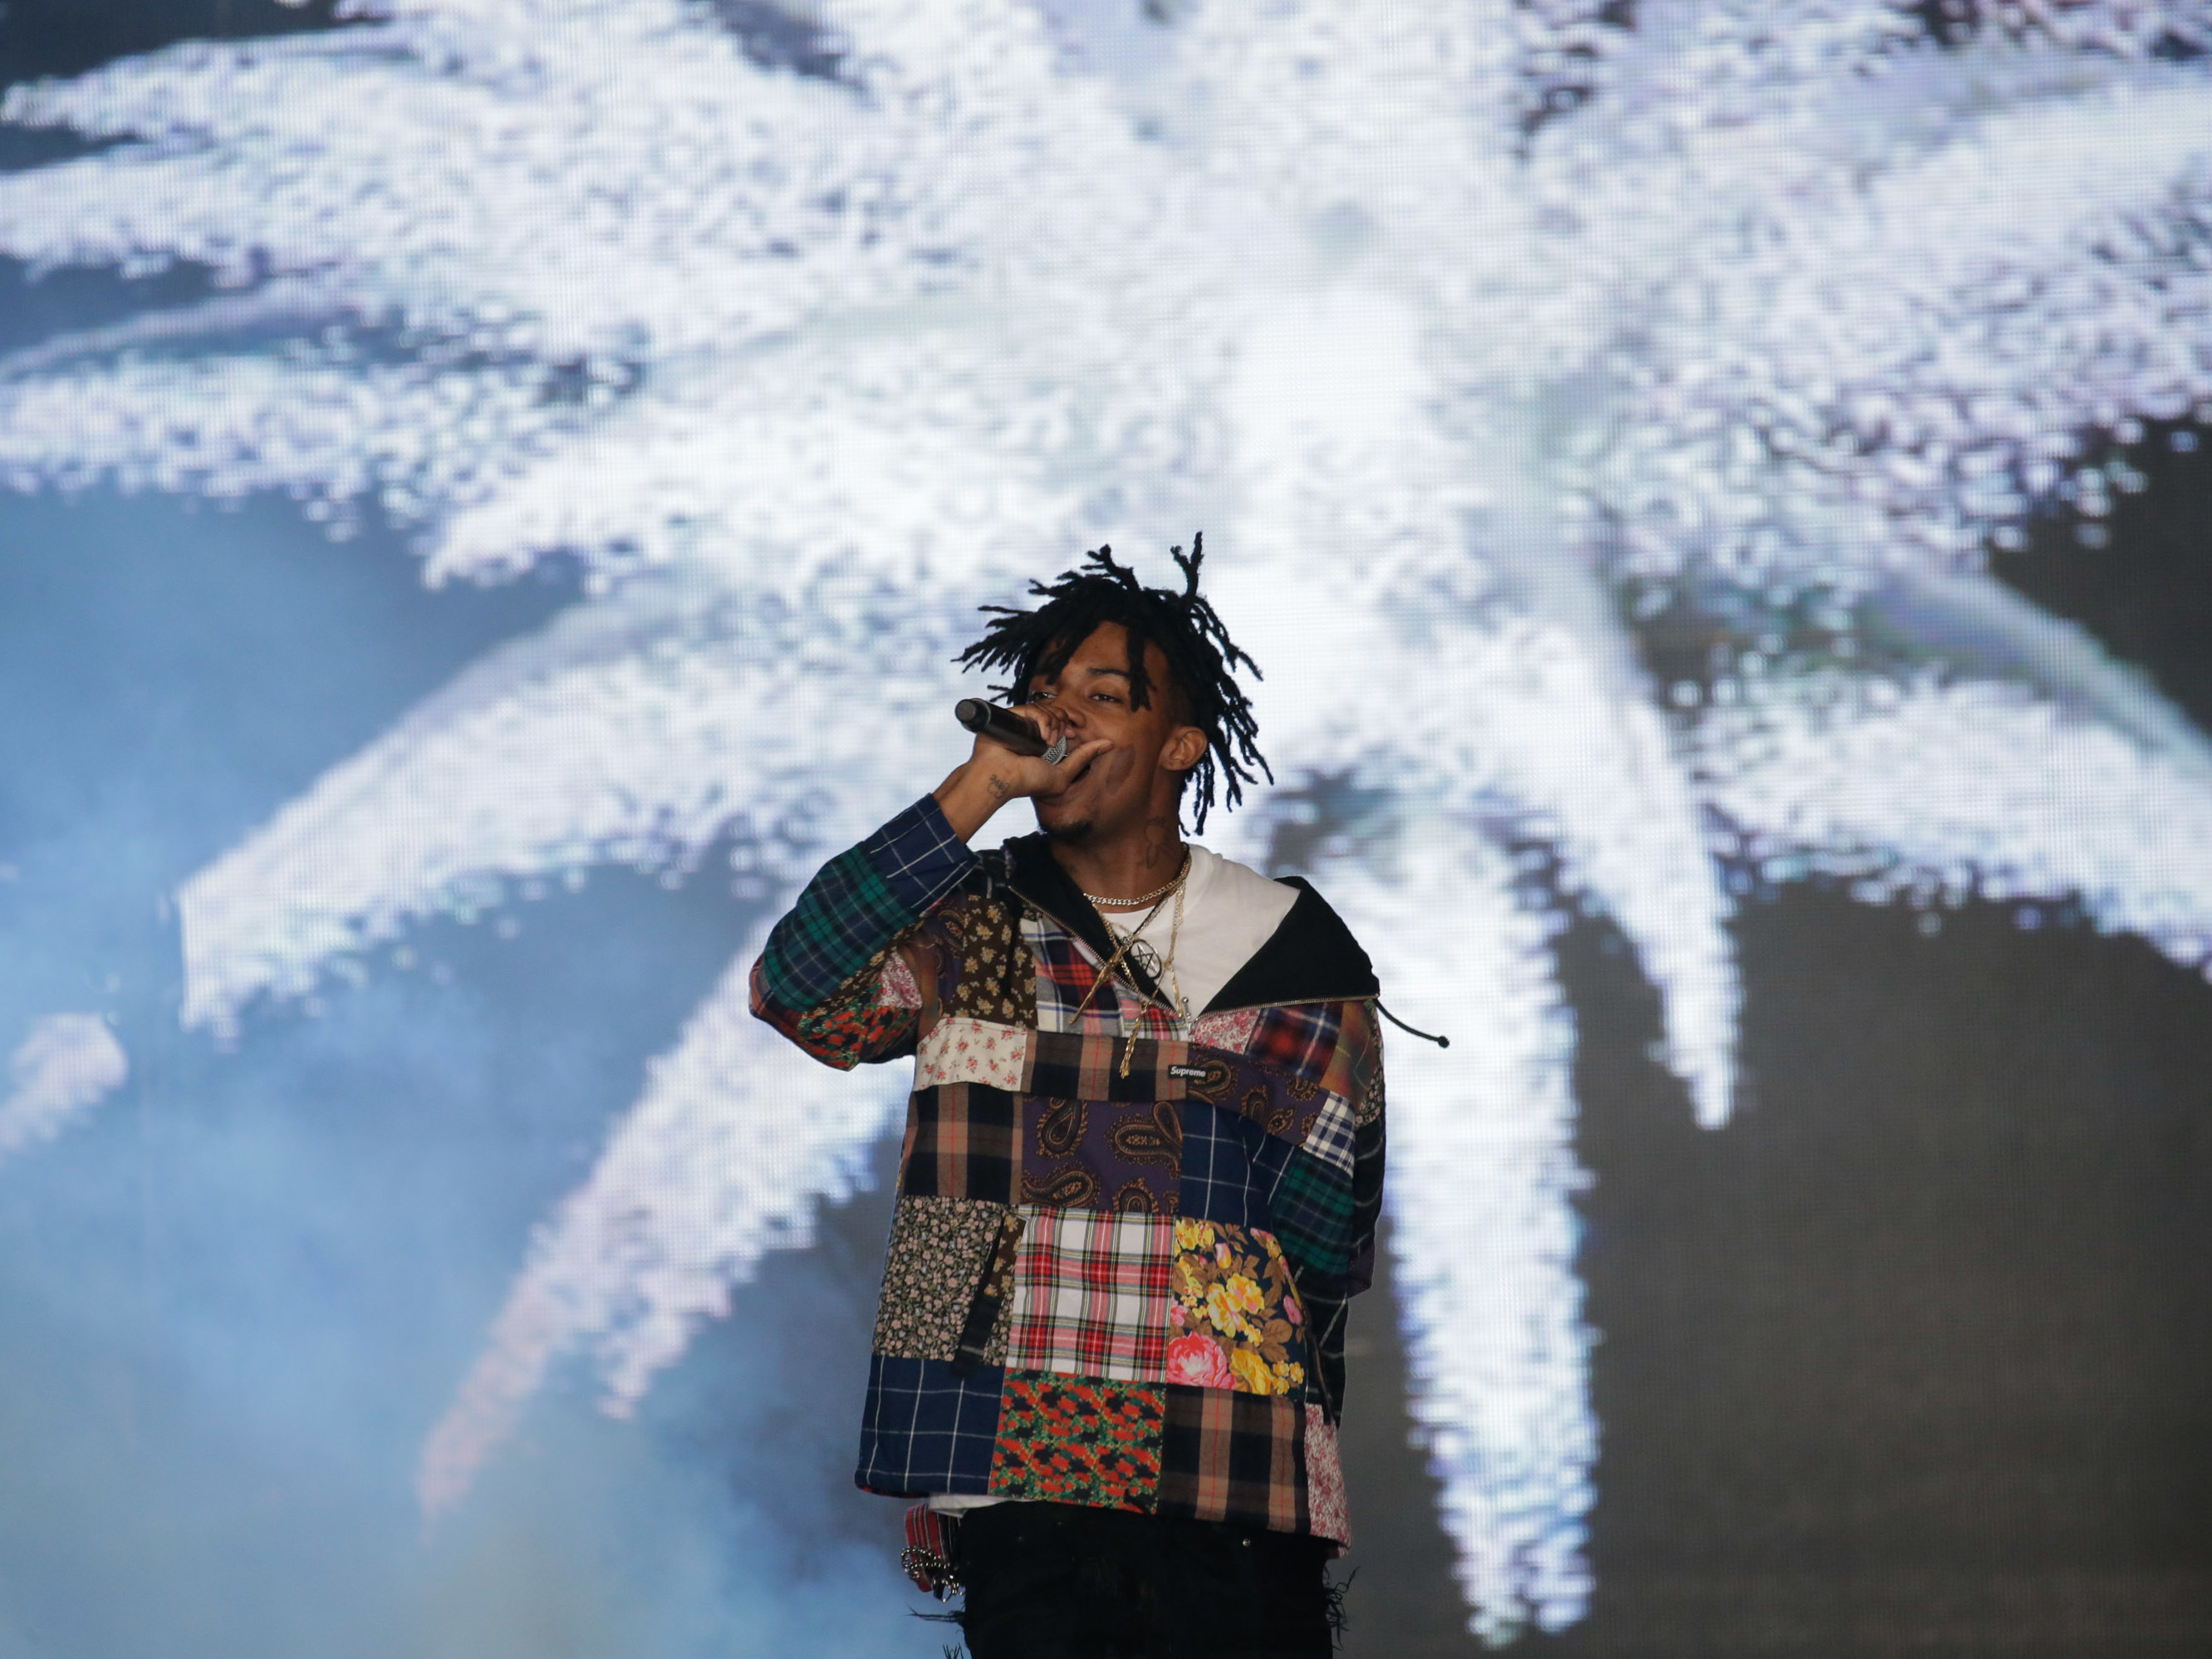 Playboi Carti Performs What At Kanye West's Show & VFILES Runway